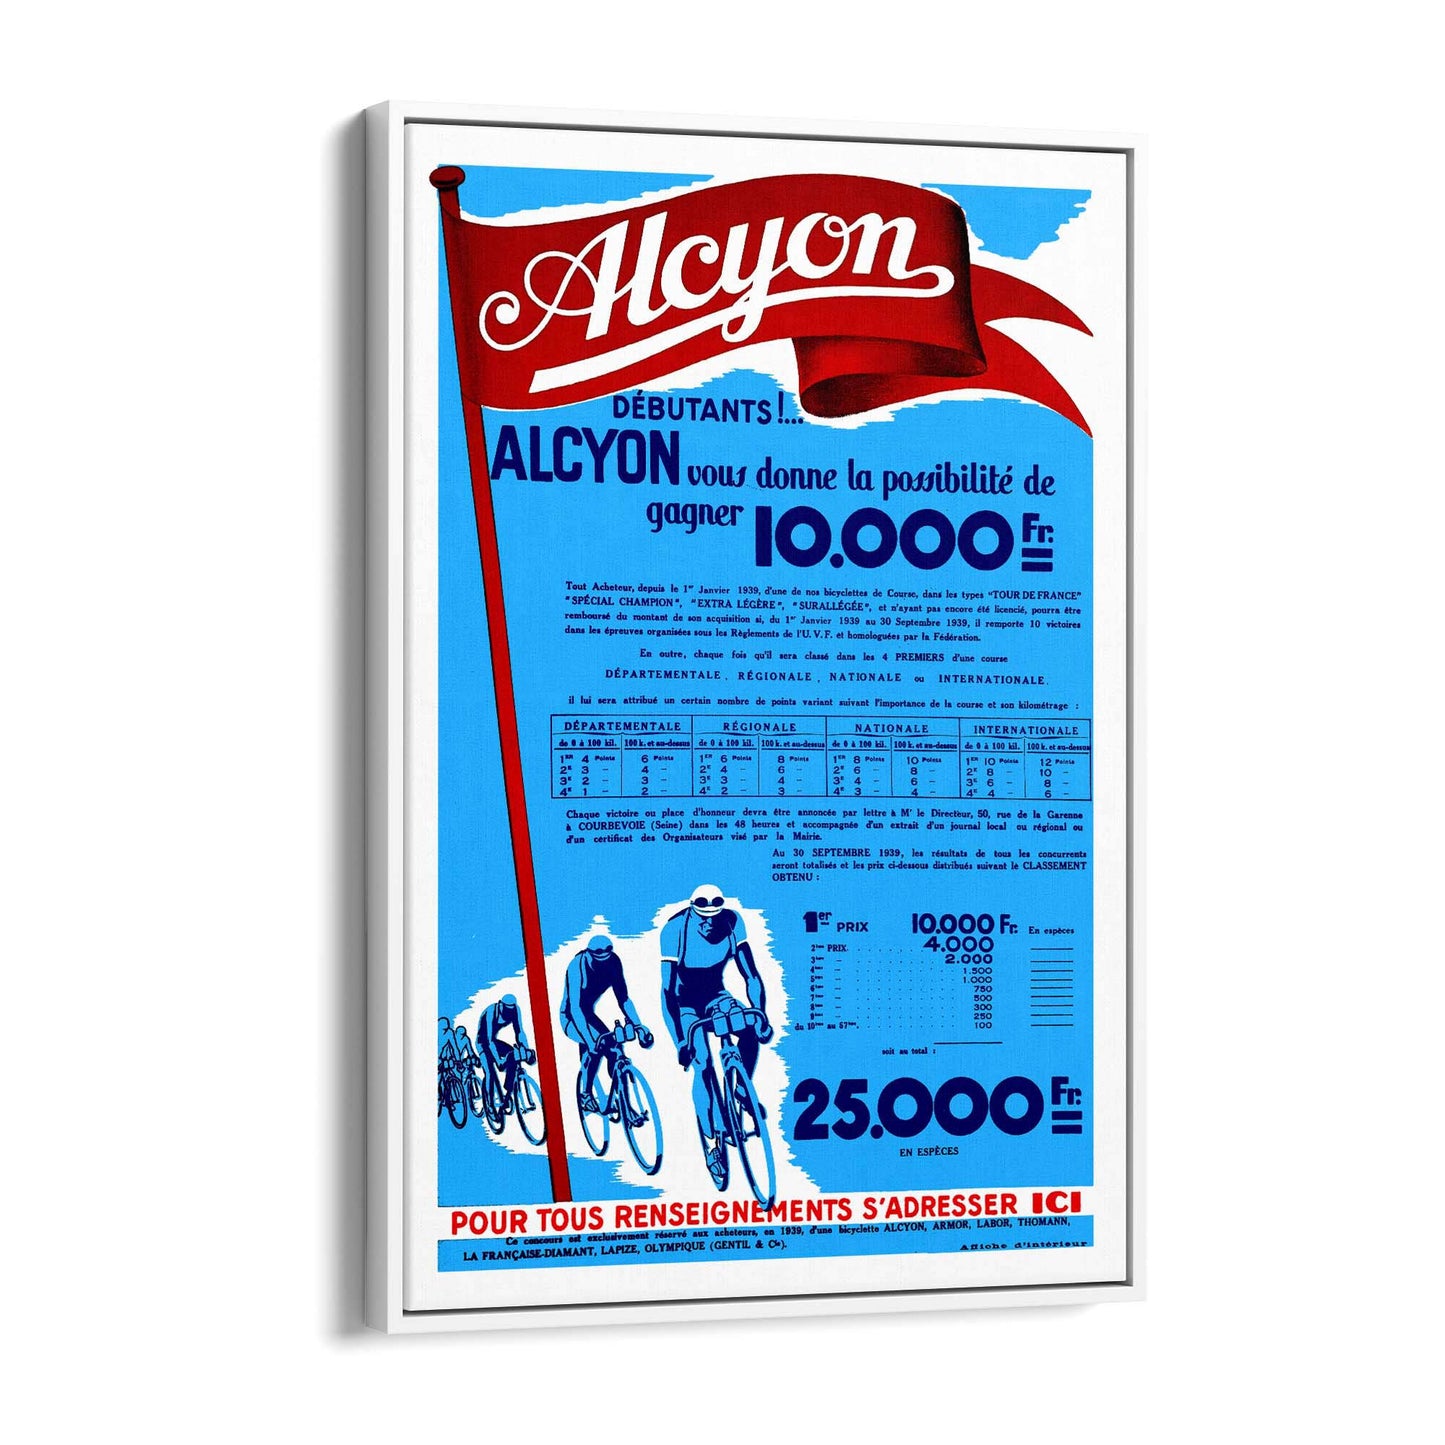 Alcyon Cycling Vintage Advert Wall Art - The Affordable Art Company